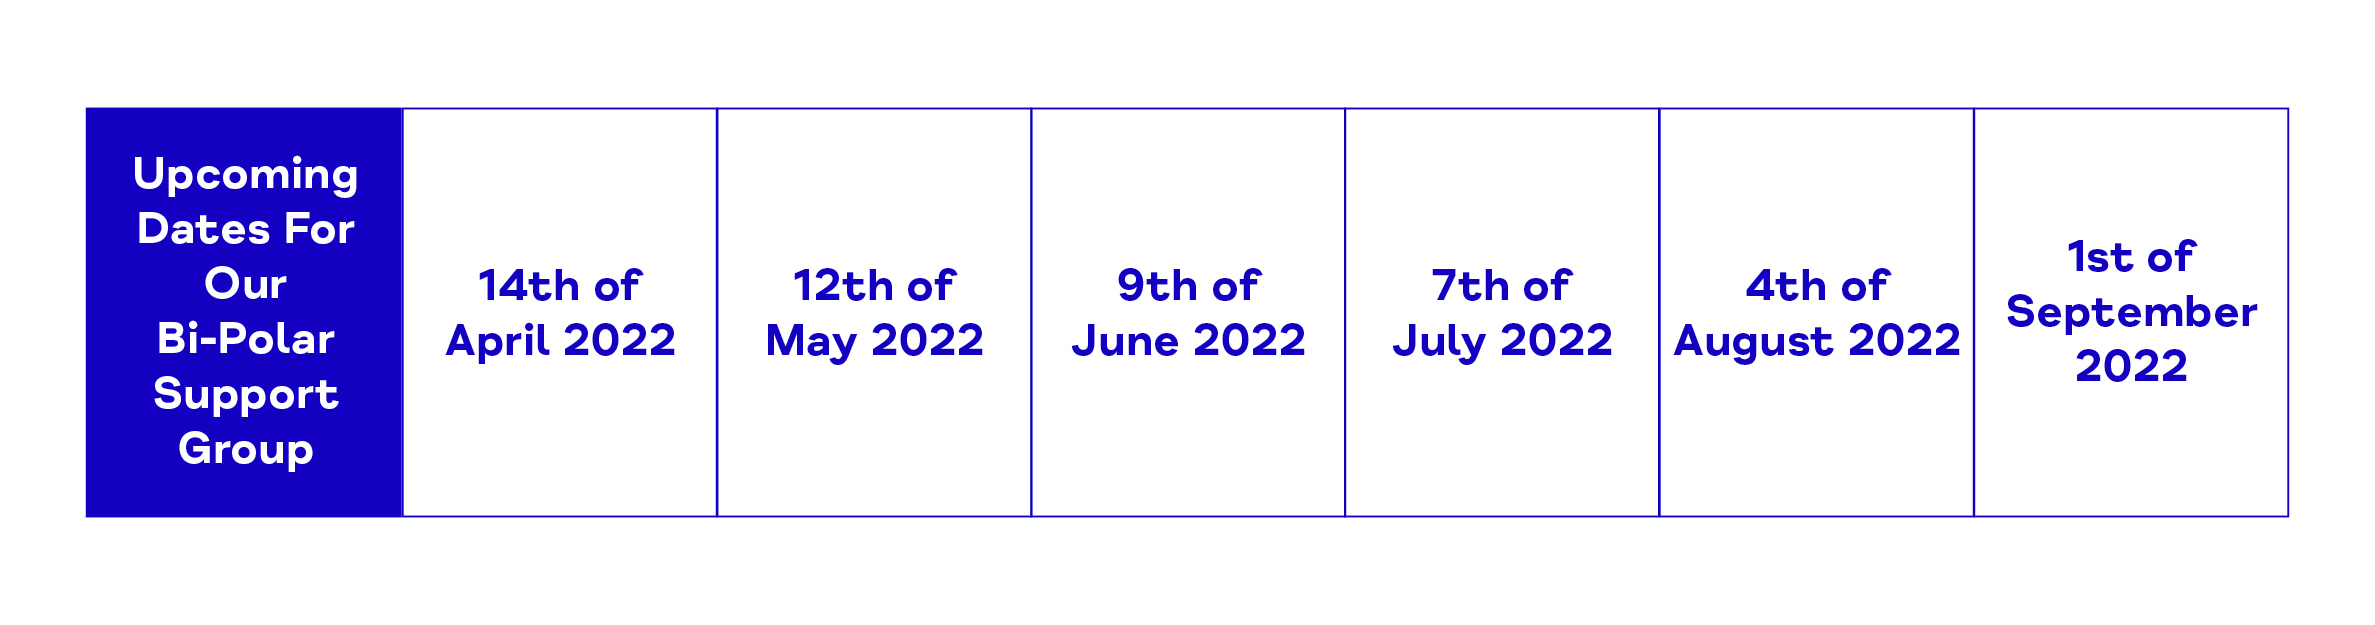 Upcoming Dates For Our Bi-Polar Support Group. 14th of April 2022. 12th of May 2022. 9th of June 2022. 7th of July 2022. 4th of August 2022. 1st of September 2022.